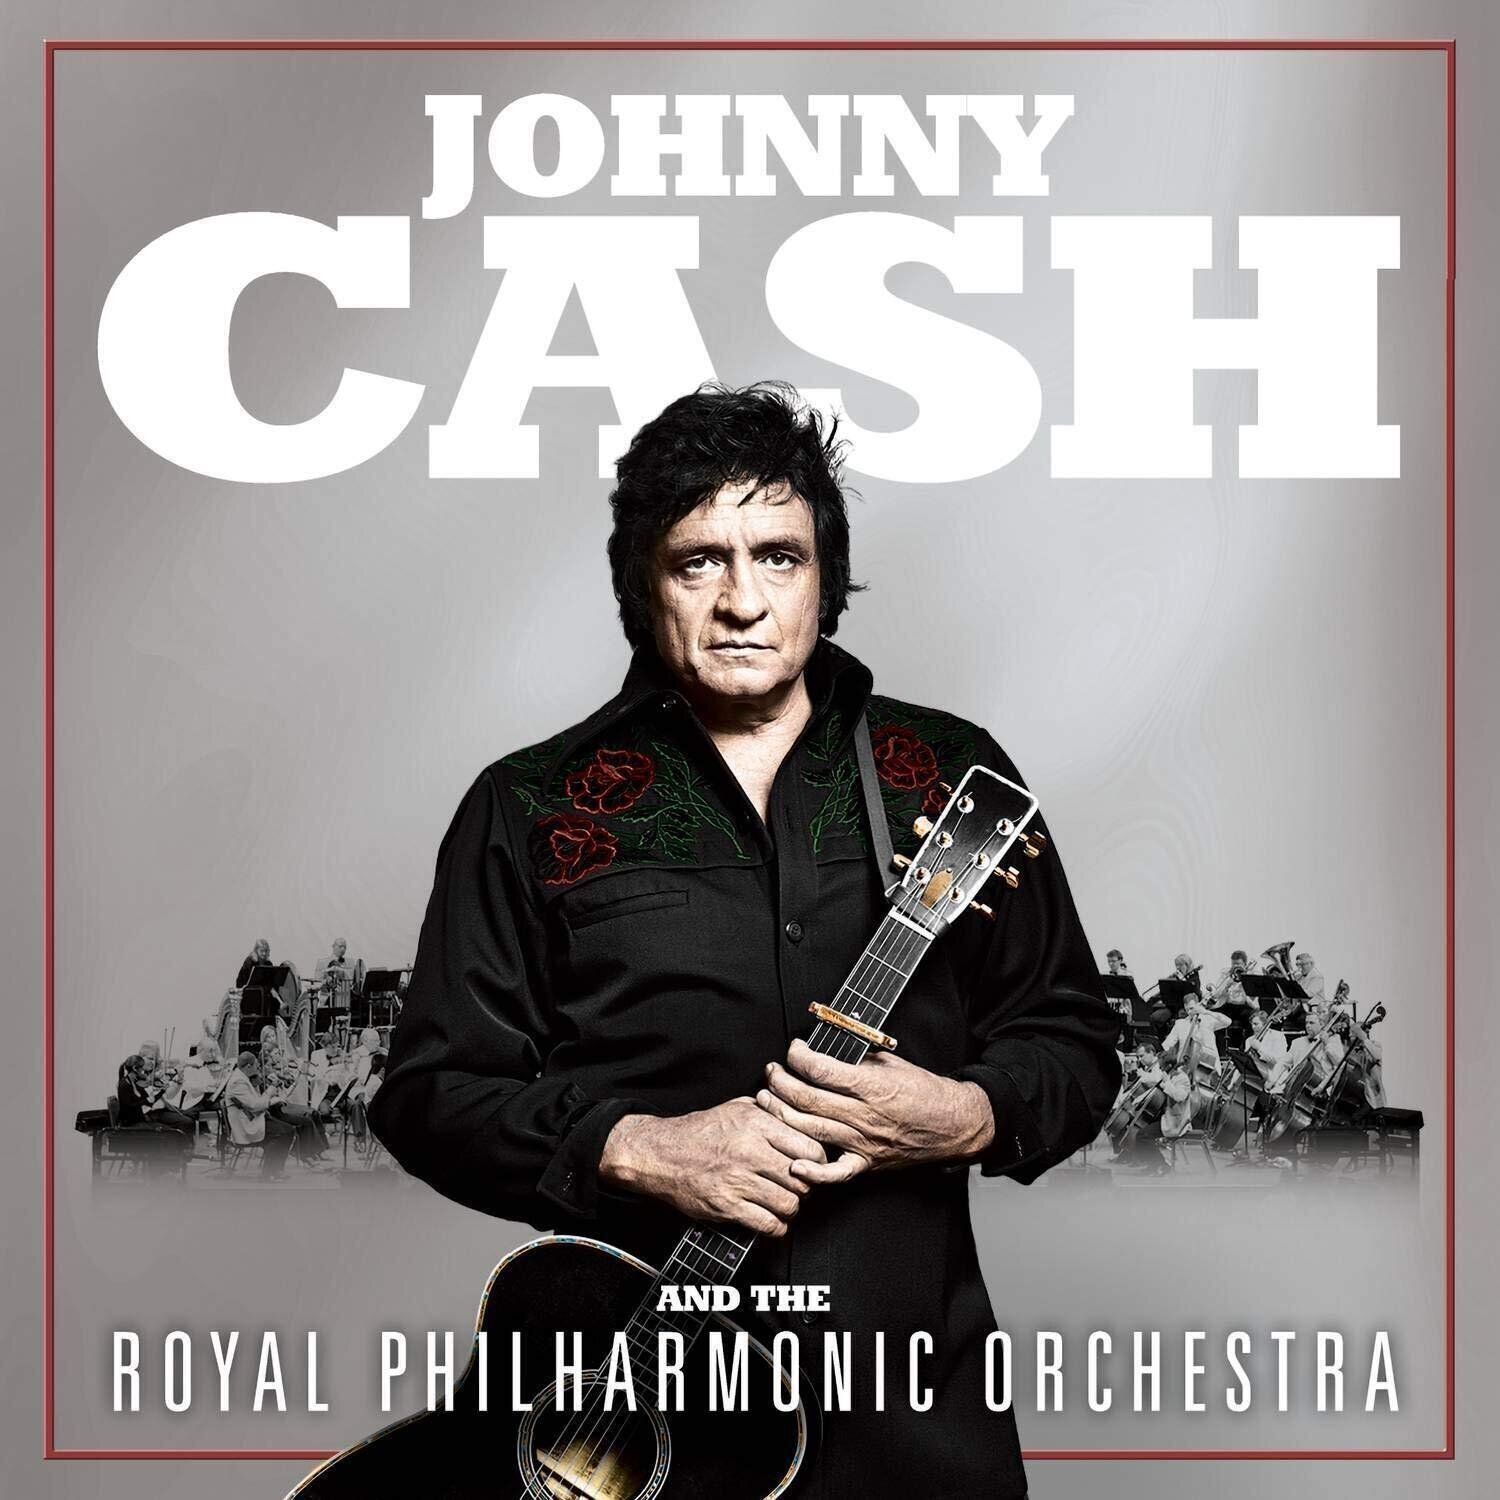 Johnny Cash - Johnny Cash And The Royal Philharmonic Orchestra (LP) Johnny Cash